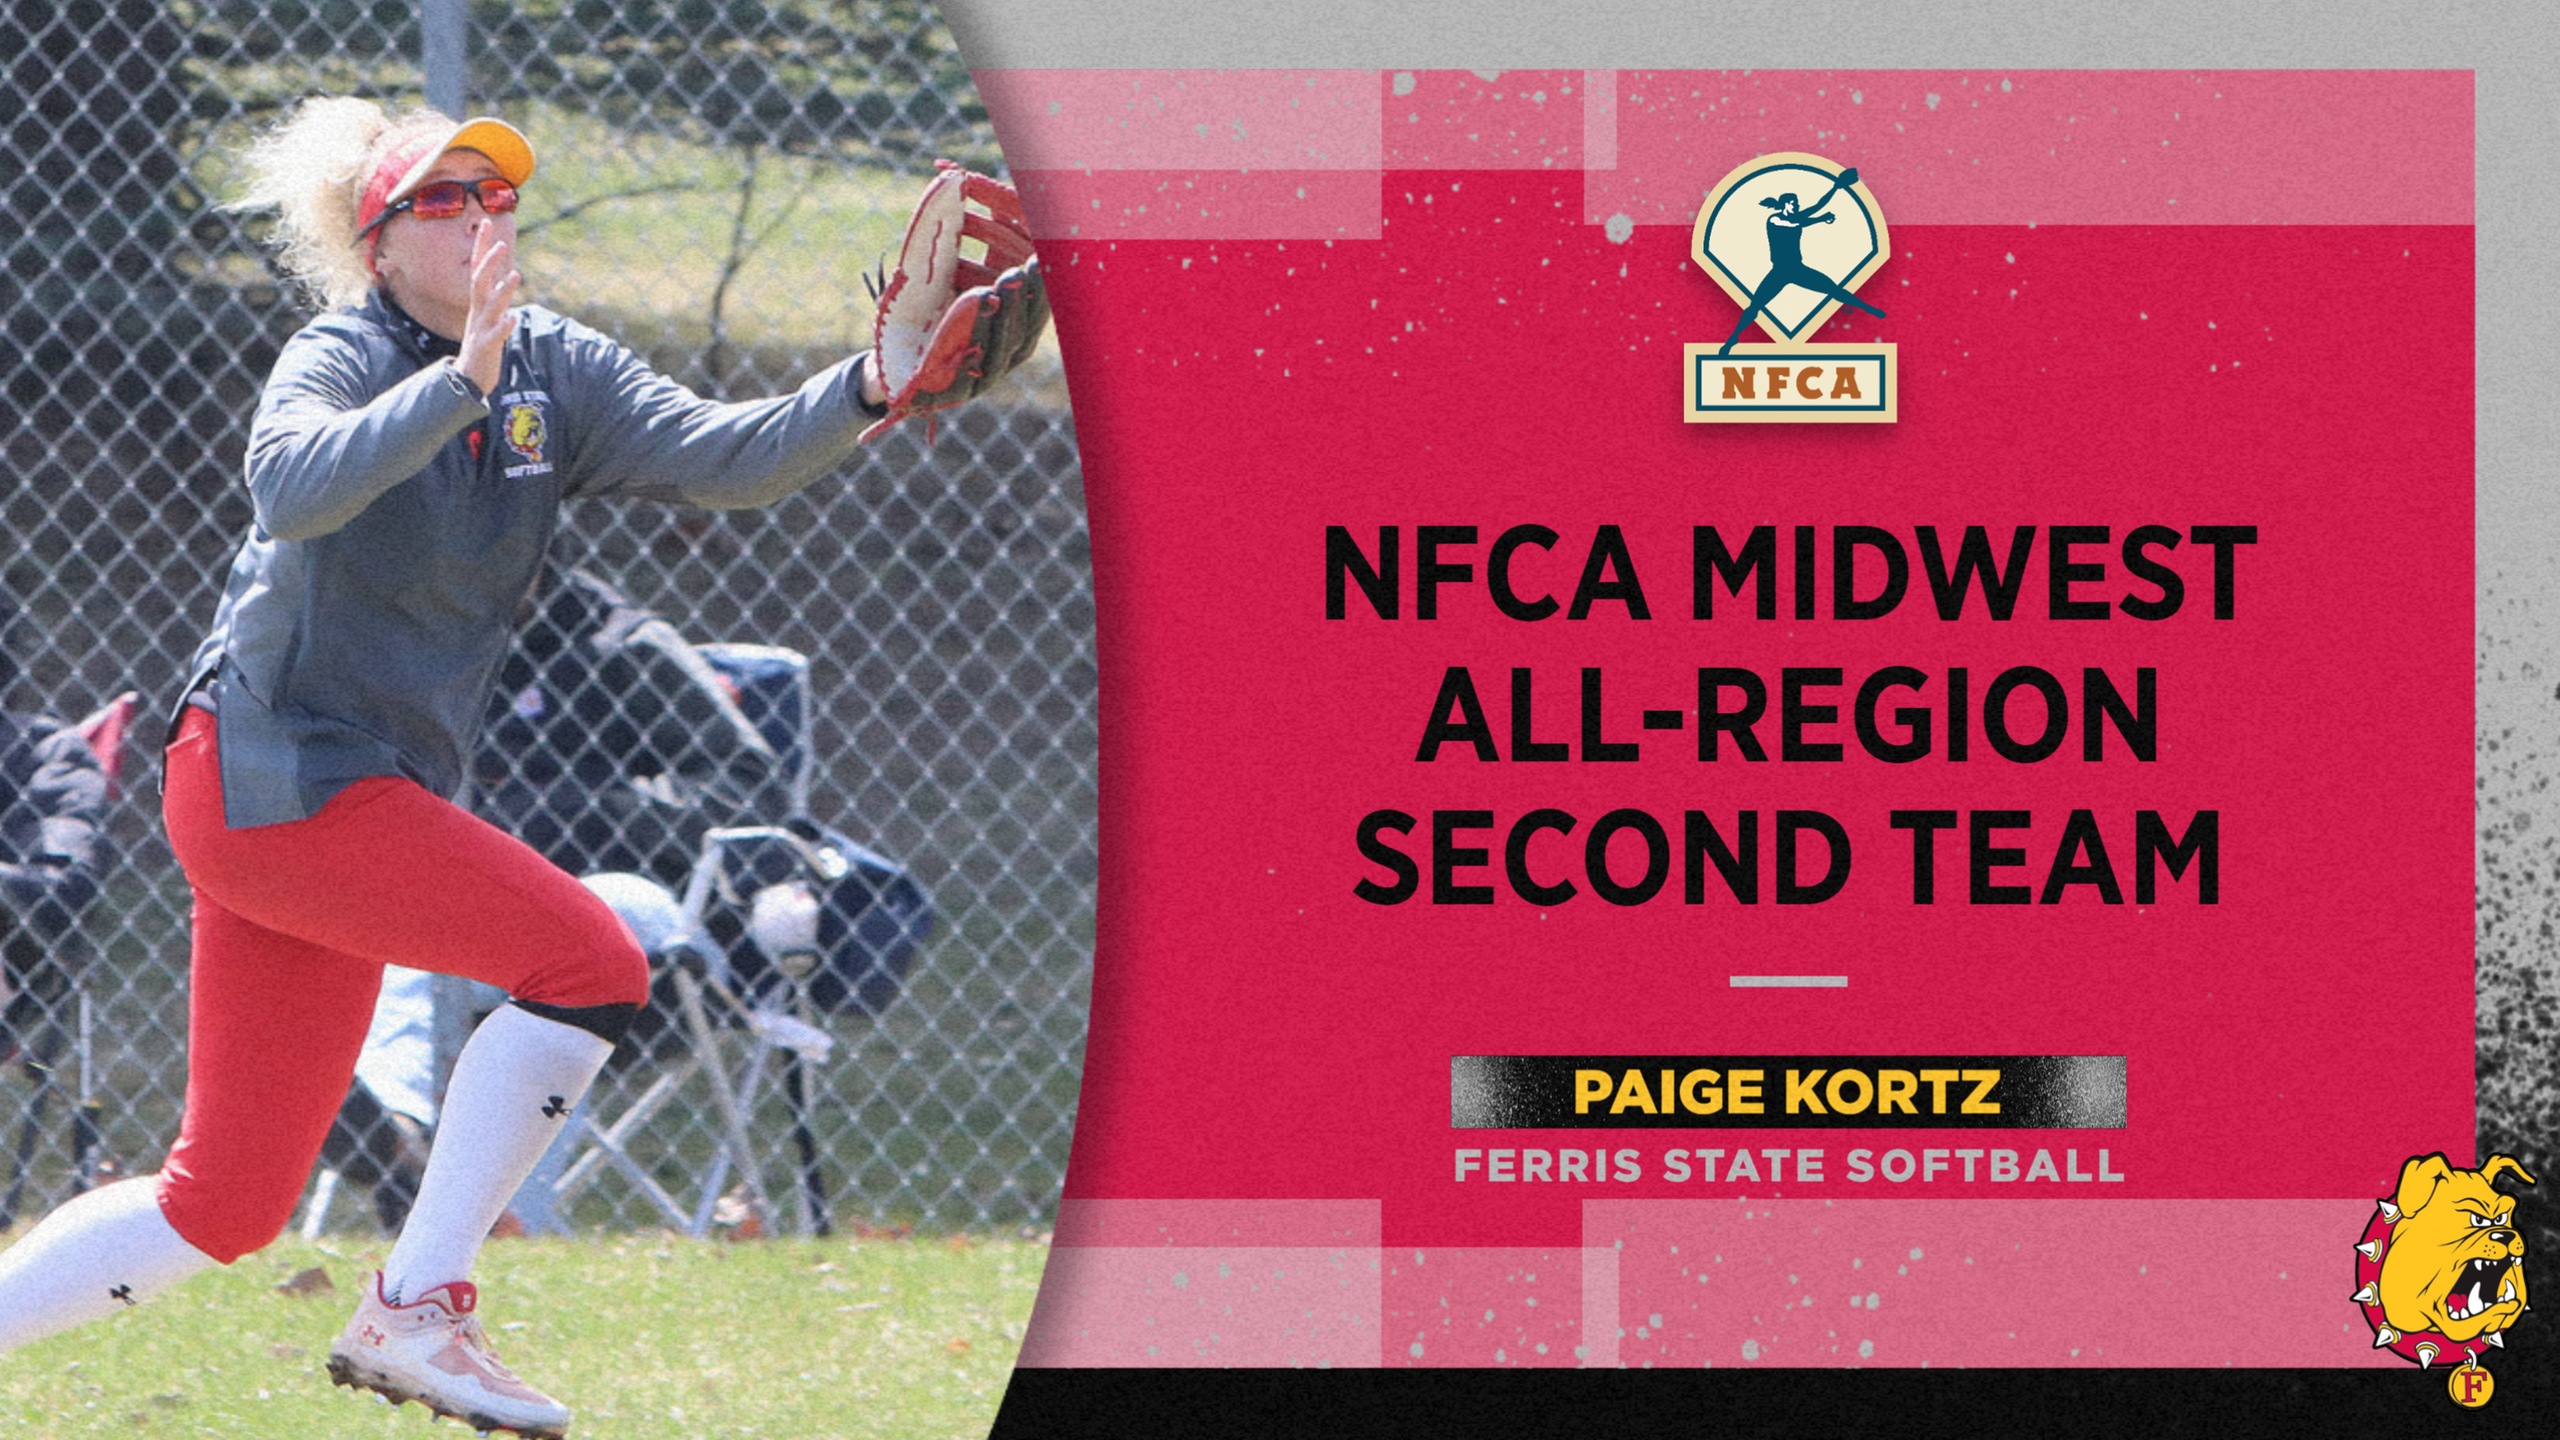 FSU's Paige Kortz Adds Another Honor By Being Chosen To NFCA All-Region Squad